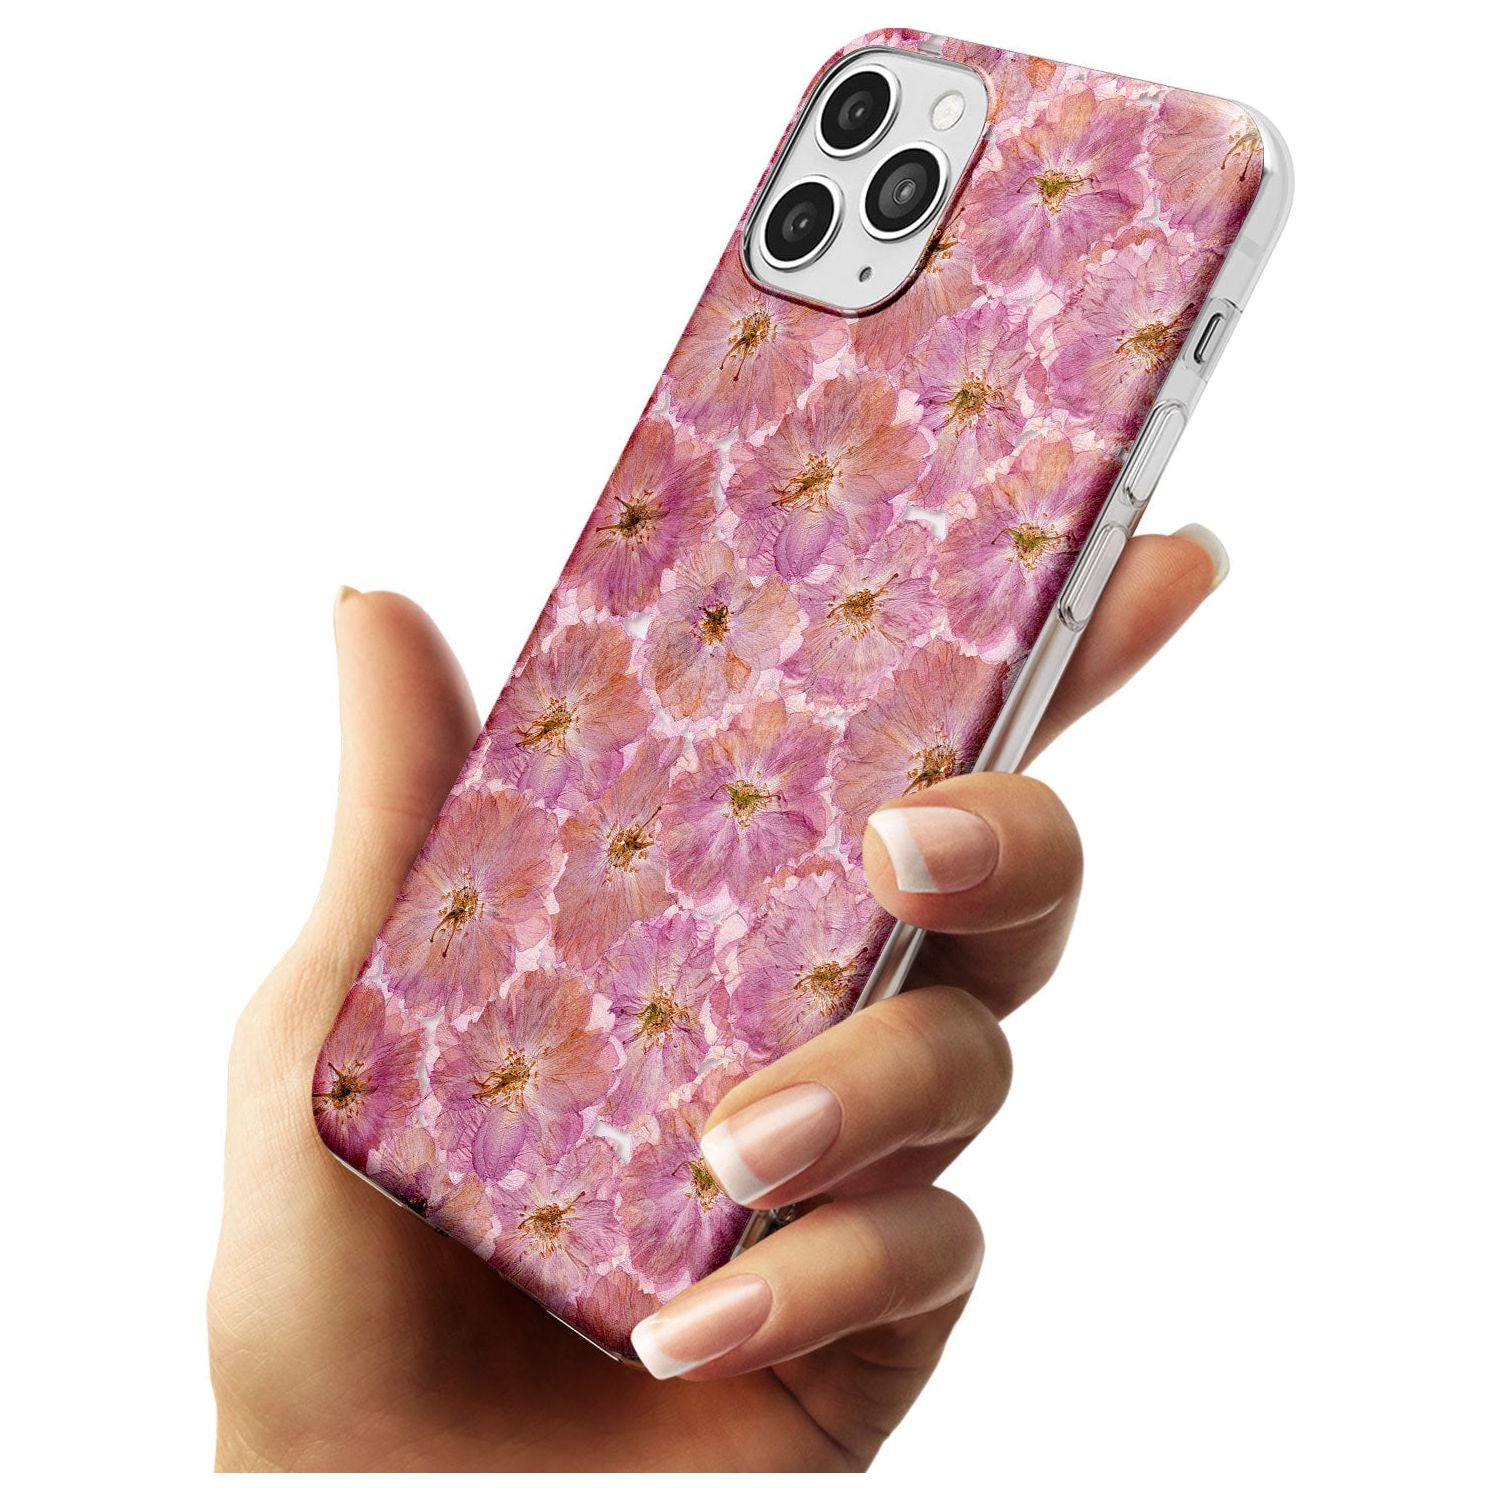 Large Pink Flowers Transparent Design Slim TPU Phone Case for iPhone 11 Pro Max